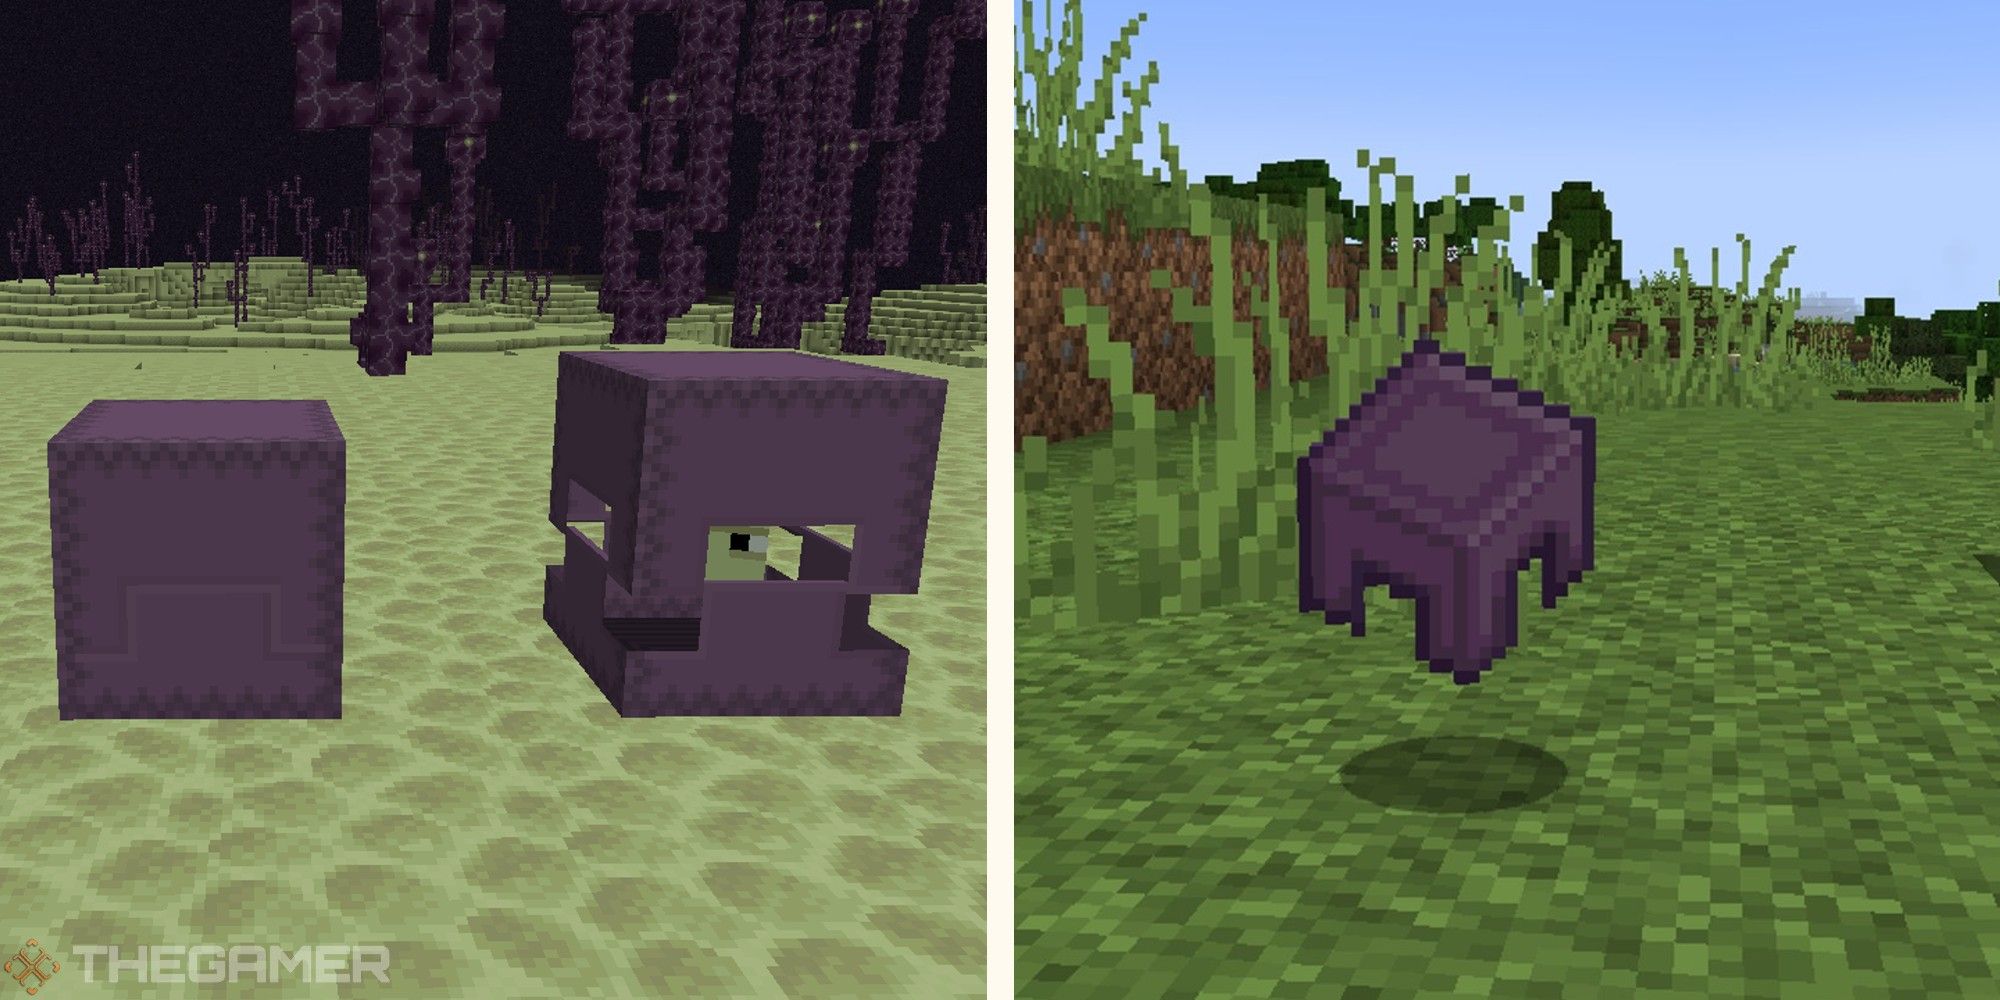 image of shulkers in end next to image of shulker shell item thrown on grass